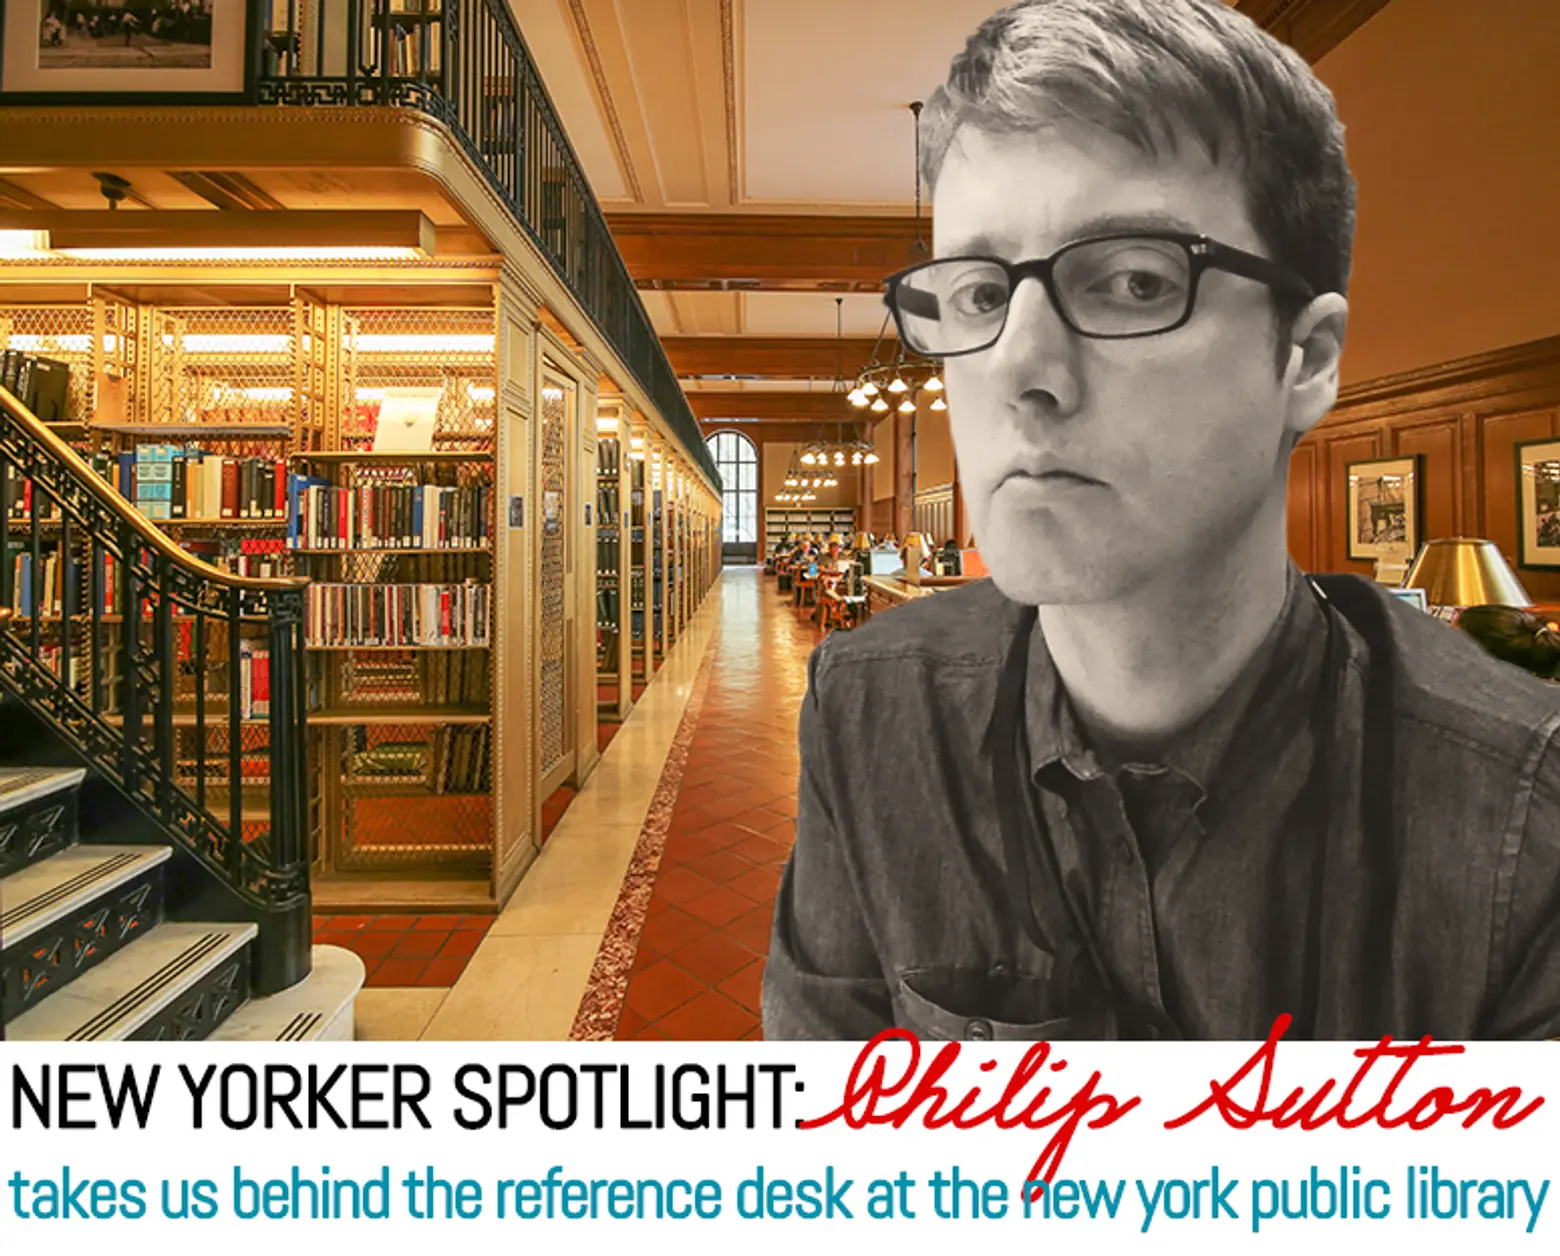 New Yorker Spotlight: Behind the Reference Desk at the New York Public Library with Philip Sutton